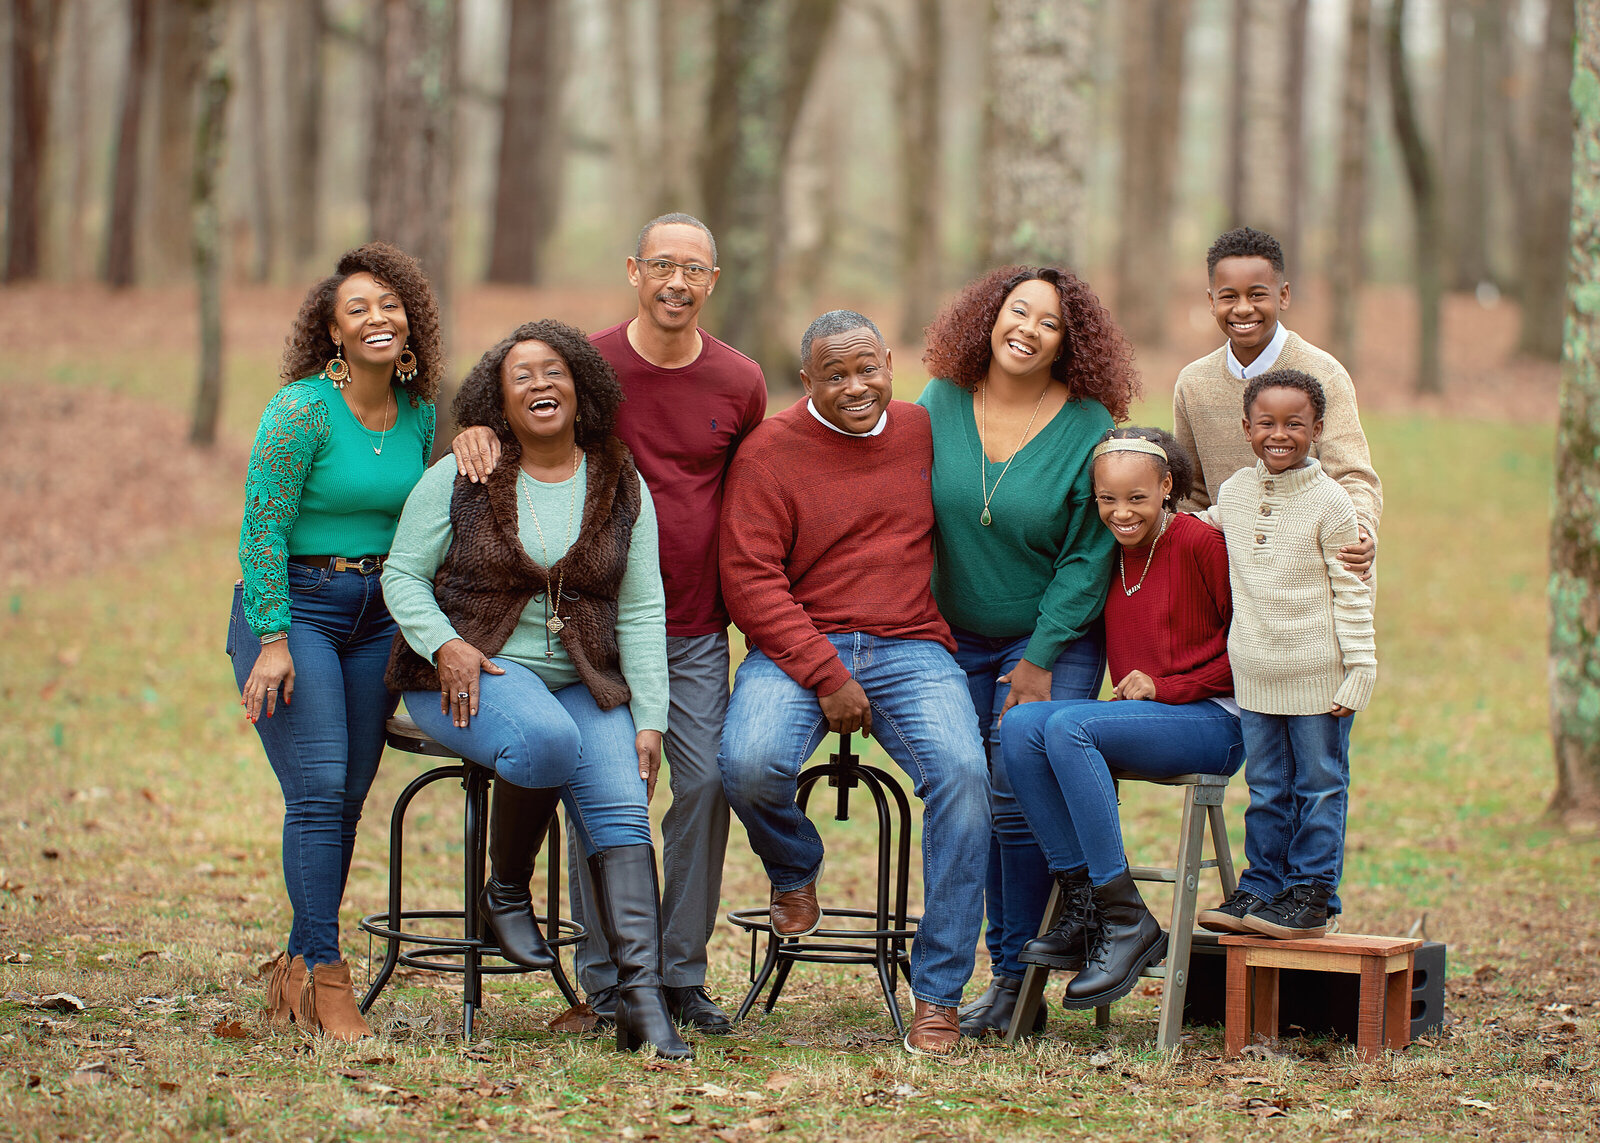 atlanta-best-award-winning-family-portrait-outdoor-fall-woods-nature-photography-photographer-twin-rivers-02